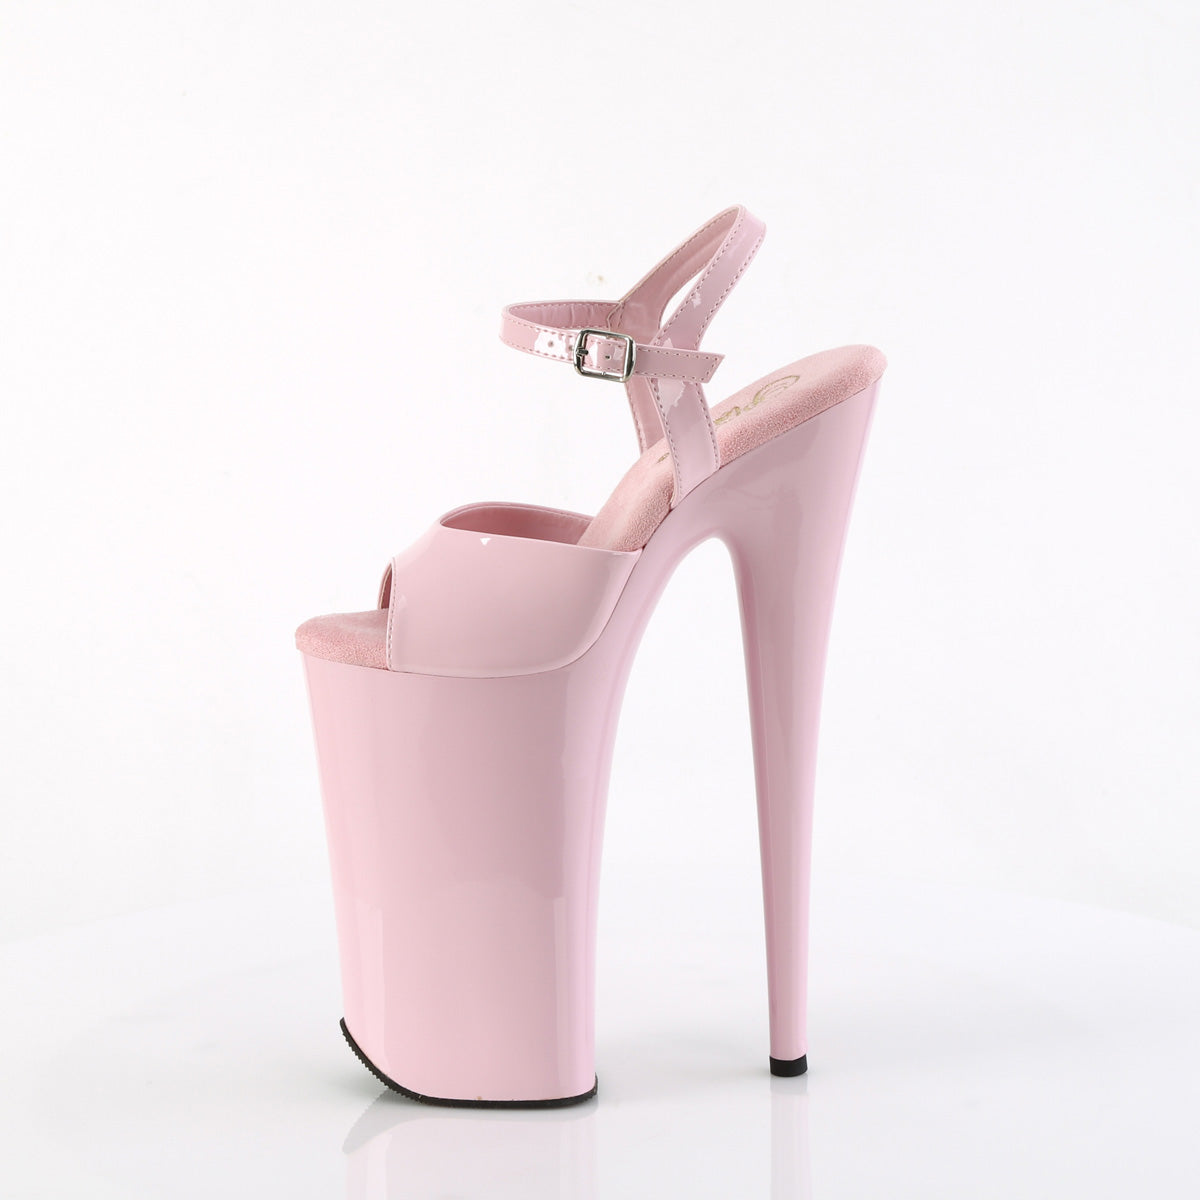 BEYOND-009 Pleaser B Pink Patent/B Pink Platform Shoes (Sexy Shoes)